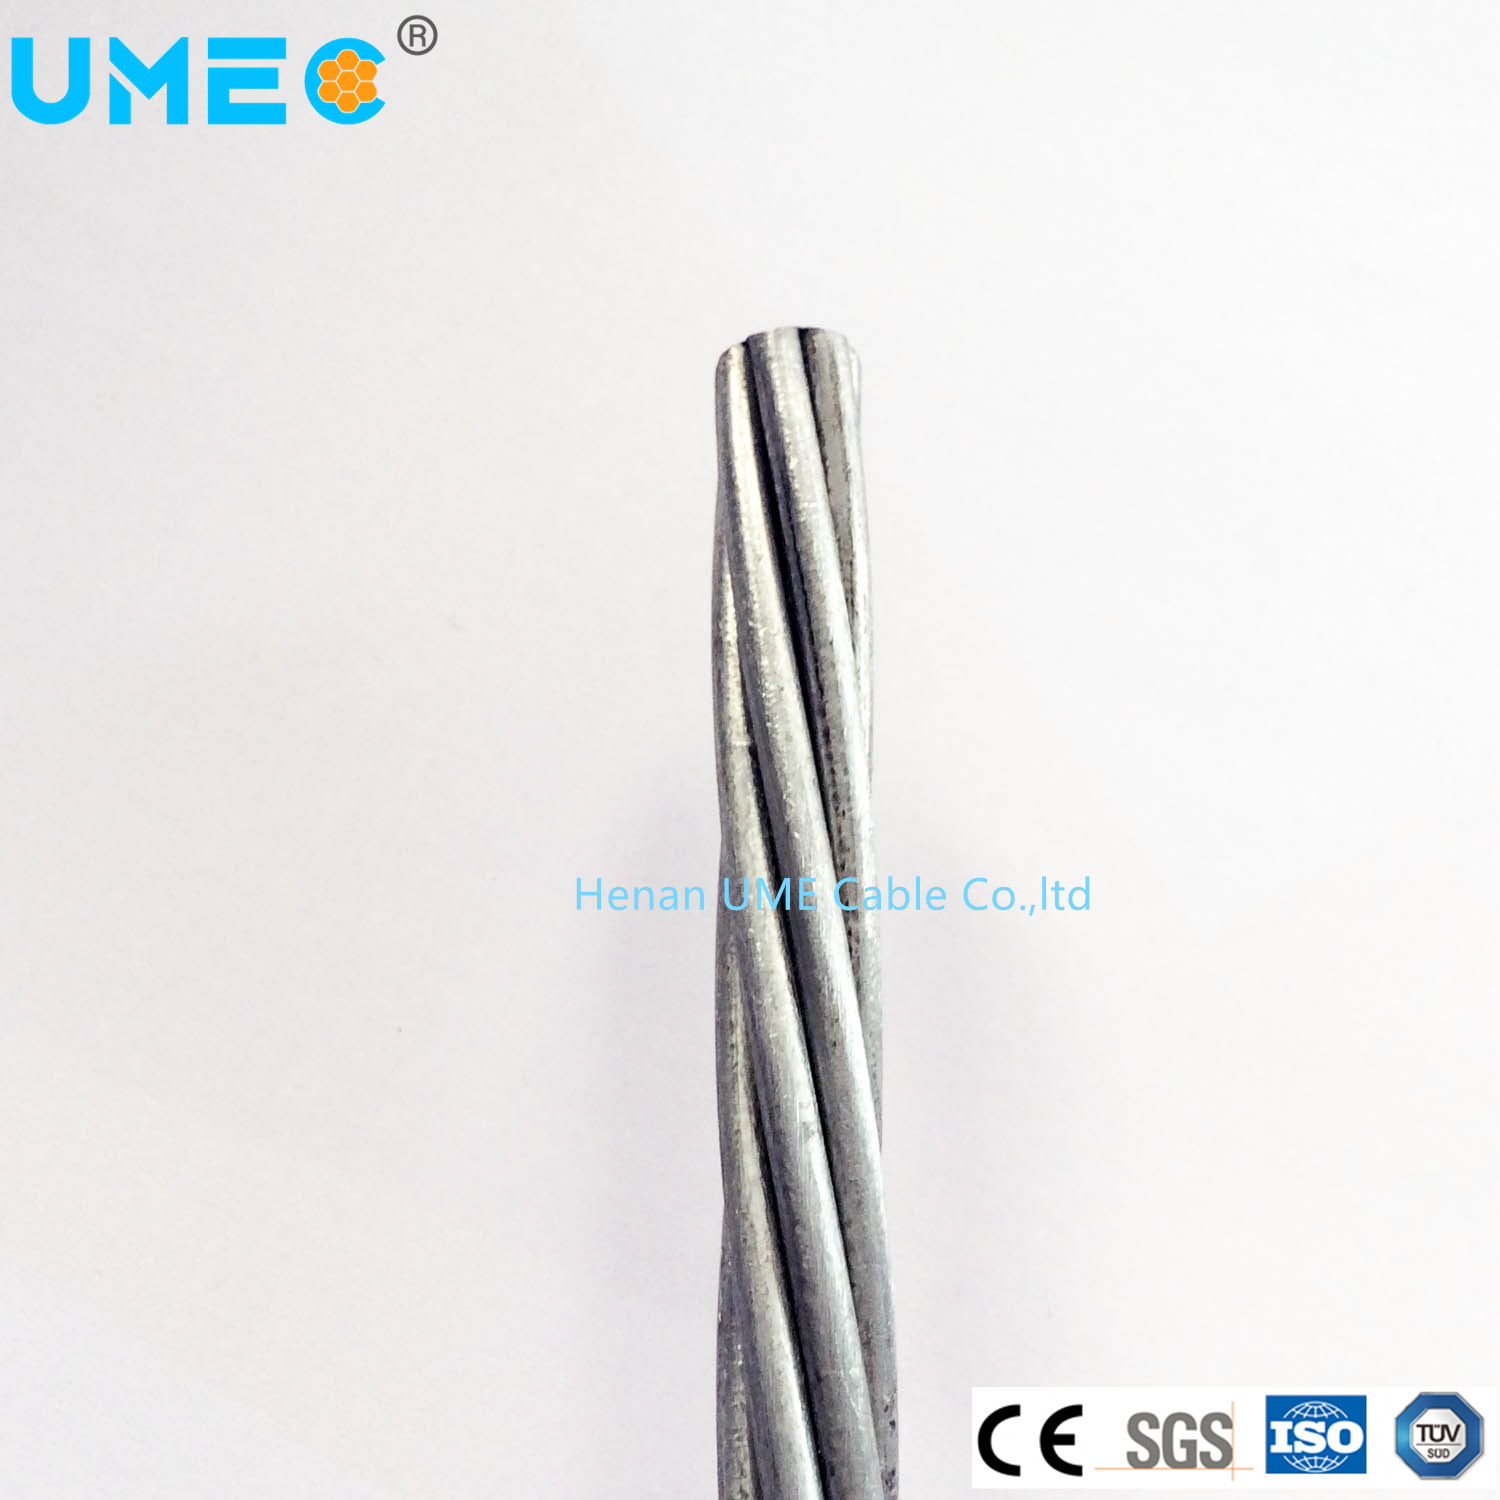 Ehs 7 Strand 5.4mm 7/1.8mm Galvanized Steel Wire Strand for Insulation Greenhouses Building